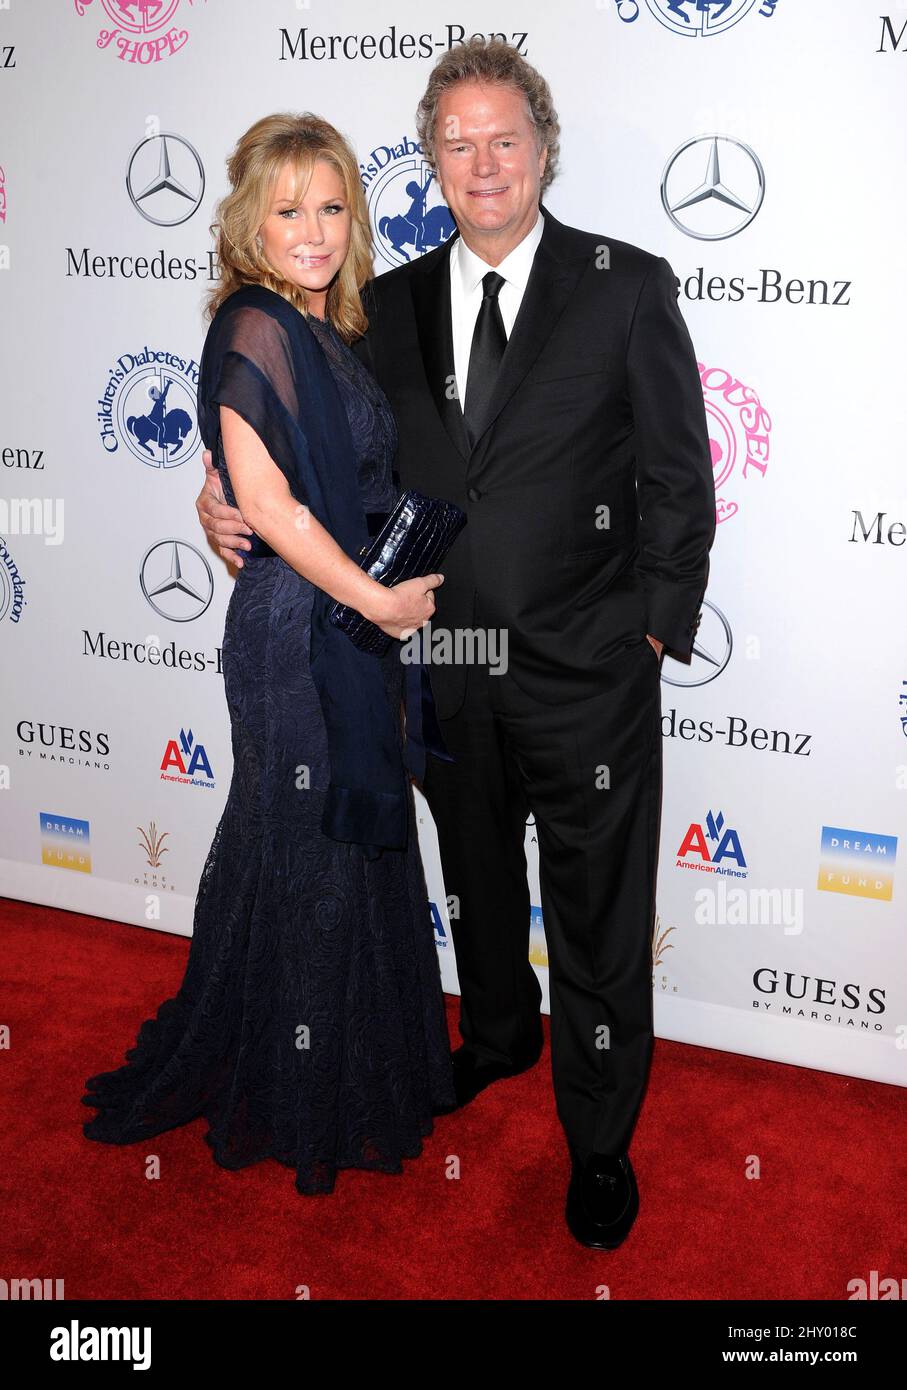 Kathy Hilton and Rick Hilton attending the 2012 Carousel of Hope Gala held at the Beverly Hilton Hotel in Los Angeles, USA. Stock Photo